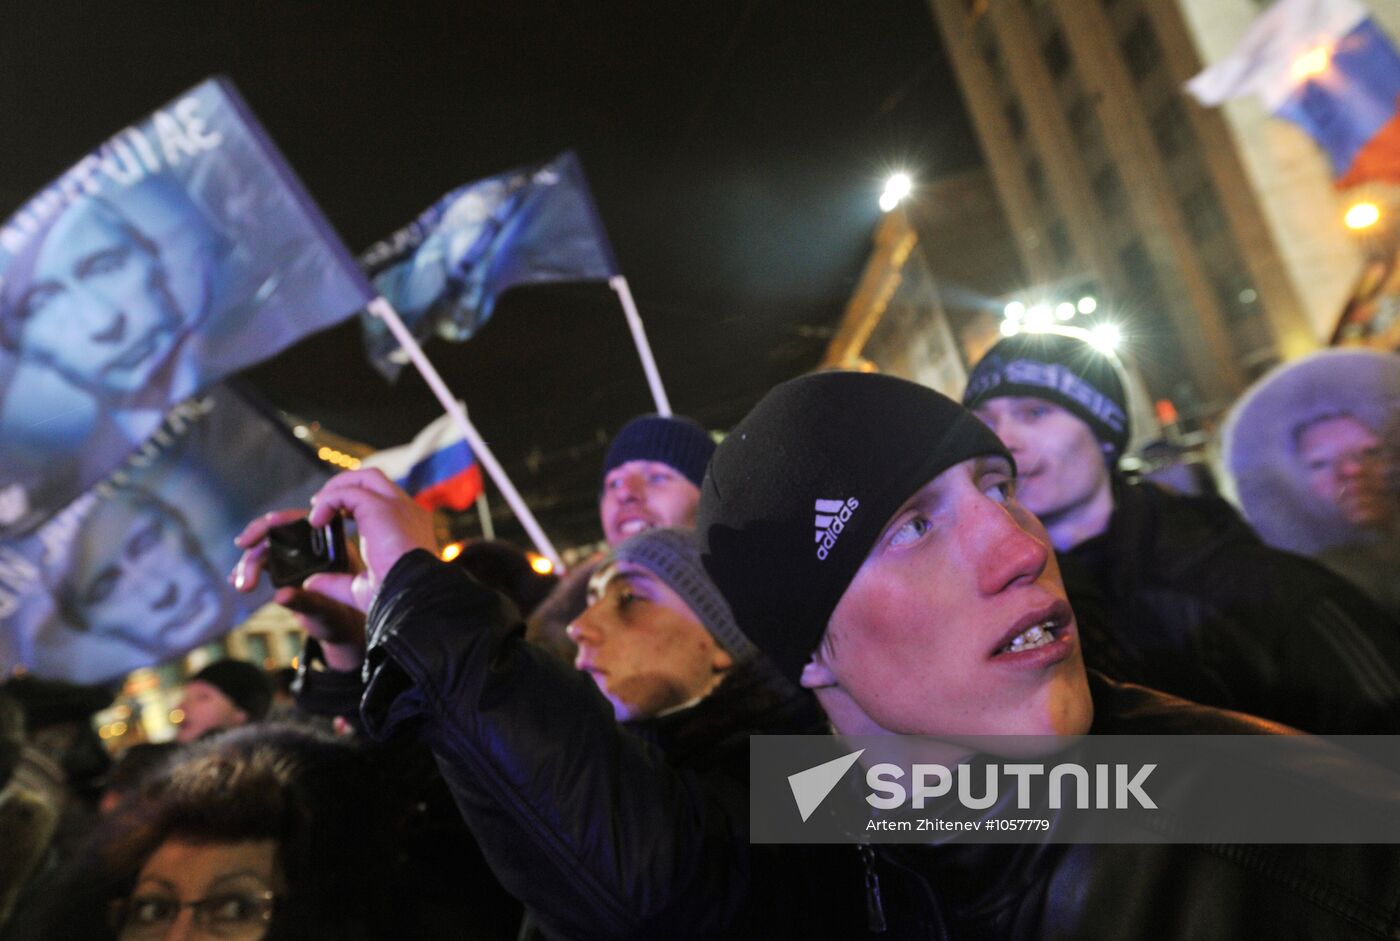 Rally in support of Vladimir Putin on Manezh Square